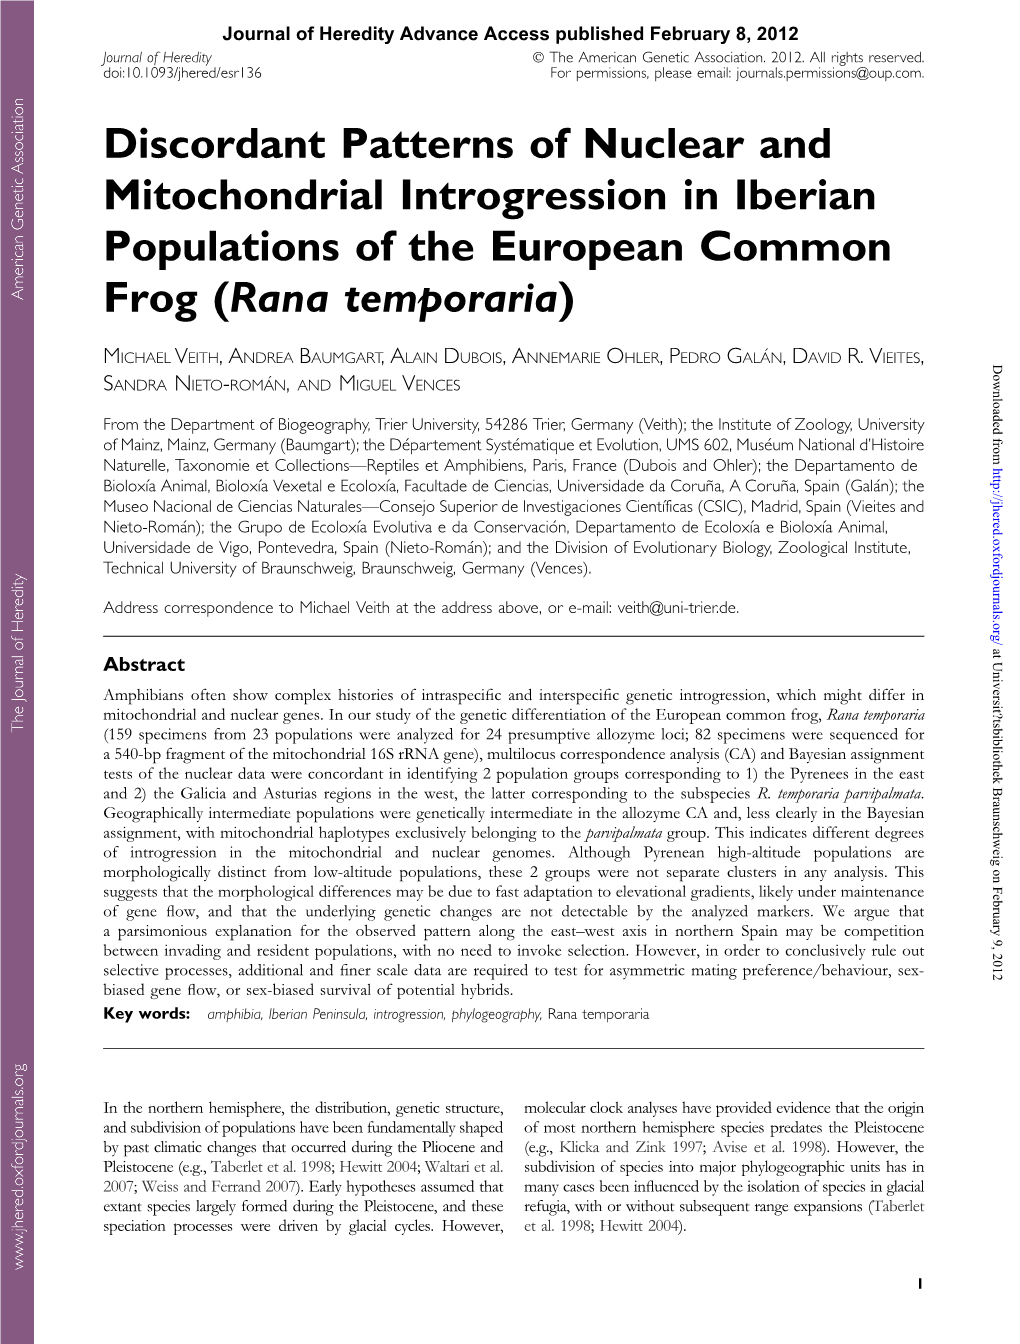 Discordant Patterns of Nuclear and Mitochondrial Introgression in Iberian Populations of the European Common Frog (Rana Temporaria)